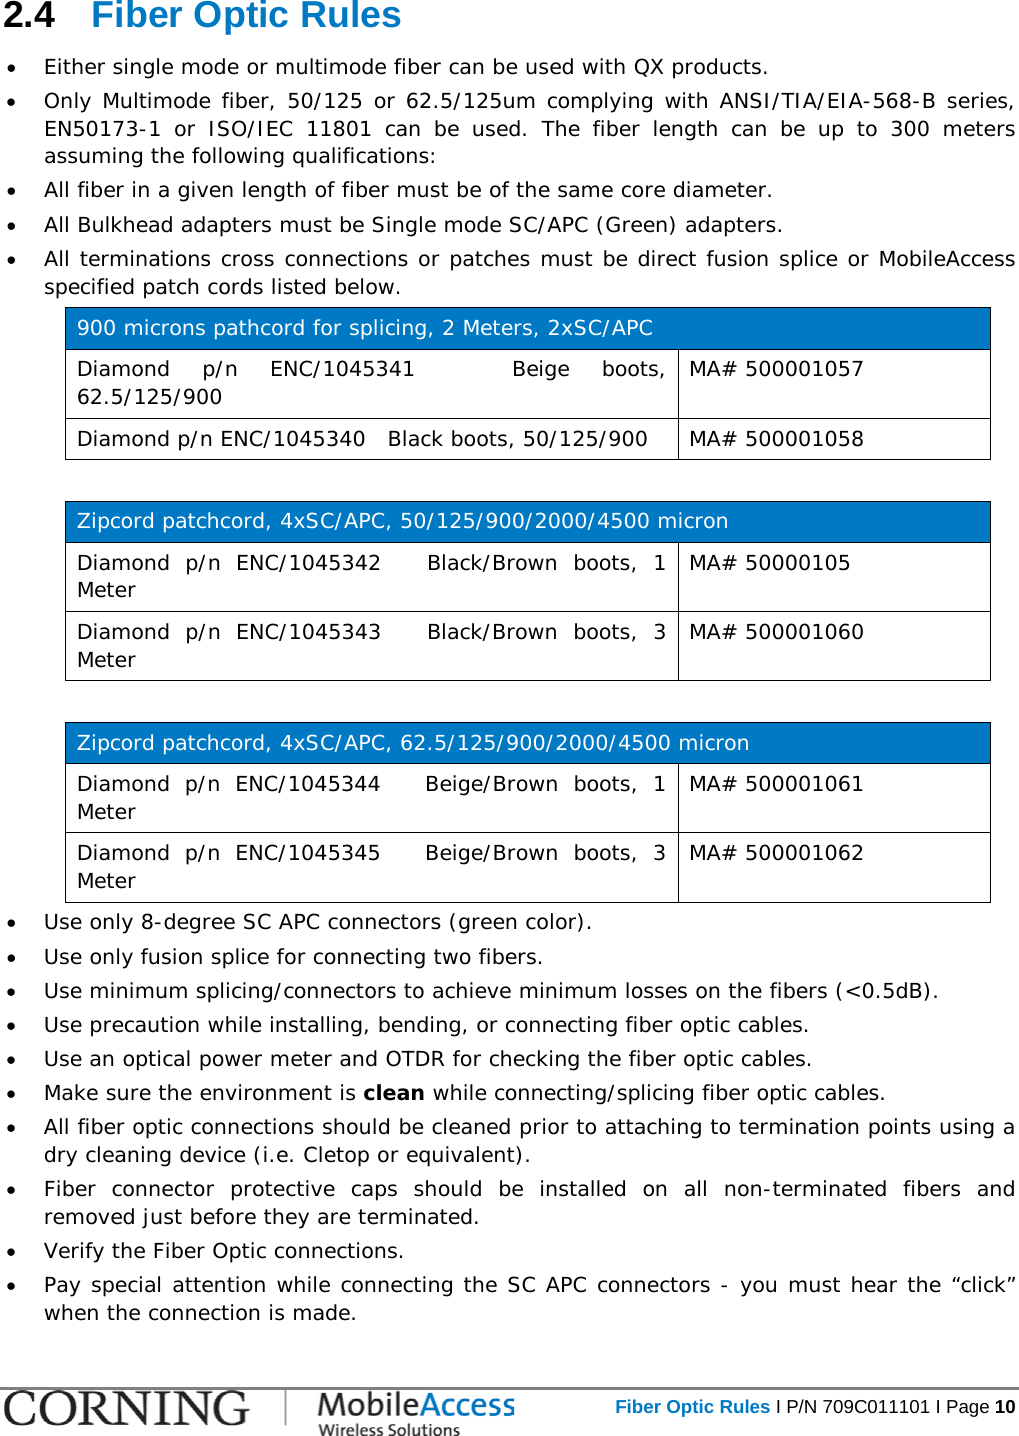   Fiber Optic Rules I P/N 709C011101 I Page 10  2.4  Fiber Optic Rules • Either single mode or multimode fiber can be used with QX products. • Only Multimode fiber, 50/125 or 62.5/125um complying with ANSI/TIA/EIA-568-B series, EN50173-1 or ISO/IEC 11801 can be used. The fiber length can be up to 300 meters assuming the following qualifications: • All fiber in a given length of fiber must be of the same core diameter.  • All Bulkhead adapters must be Single mode SC/APC (Green) adapters.  • All terminations cross connections or patches must be direct fusion splice or MobileAccess specified patch cords listed below.  900 microns pathcord for splicing, 2 Meters, 2xSC/APC Diamond p/n ENC/1045341   Beige boots, 62.5/125/900 MA# 500001057 Diamond p/n ENC/1045340   Black boots, 50/125/900 MA# 500001058  Zipcord patchcord, 4xSC/APC, 50/125/900/2000/4500 micron Diamond p/n ENC/1045342   Black/Brown boots, 1 Meter MA# 50000105 Diamond p/n ENC/1045343   Black/Brown boots, 3 Meter MA# 500001060  Zipcord patchcord, 4xSC/APC, 62.5/125/900/2000/4500 micron Diamond p/n ENC/1045344   Beige/Brown boots, 1 Meter MA# 500001061 Diamond p/n ENC/1045345   Beige/Brown boots, 3 Meter MA# 500001062 • Use only 8-degree SC APC connectors (green color). • Use only fusion splice for connecting two fibers. • Use minimum splicing/connectors to achieve minimum losses on the fibers (&lt;0.5dB). • Use precaution while installing, bending, or connecting fiber optic cables. • Use an optical power meter and OTDR for checking the fiber optic cables. • Make sure the environment is clean while connecting/splicing fiber optic cables.  • All fiber optic connections should be cleaned prior to attaching to termination points using a dry cleaning device (i.e. Cletop or equivalent). • Fiber connector protective caps should be installed on all non-terminated fibers and removed just before they are terminated. • Verify the Fiber Optic connections.  • Pay special attention while connecting the SC APC connectors - you must hear the “click” when the connection is made. 